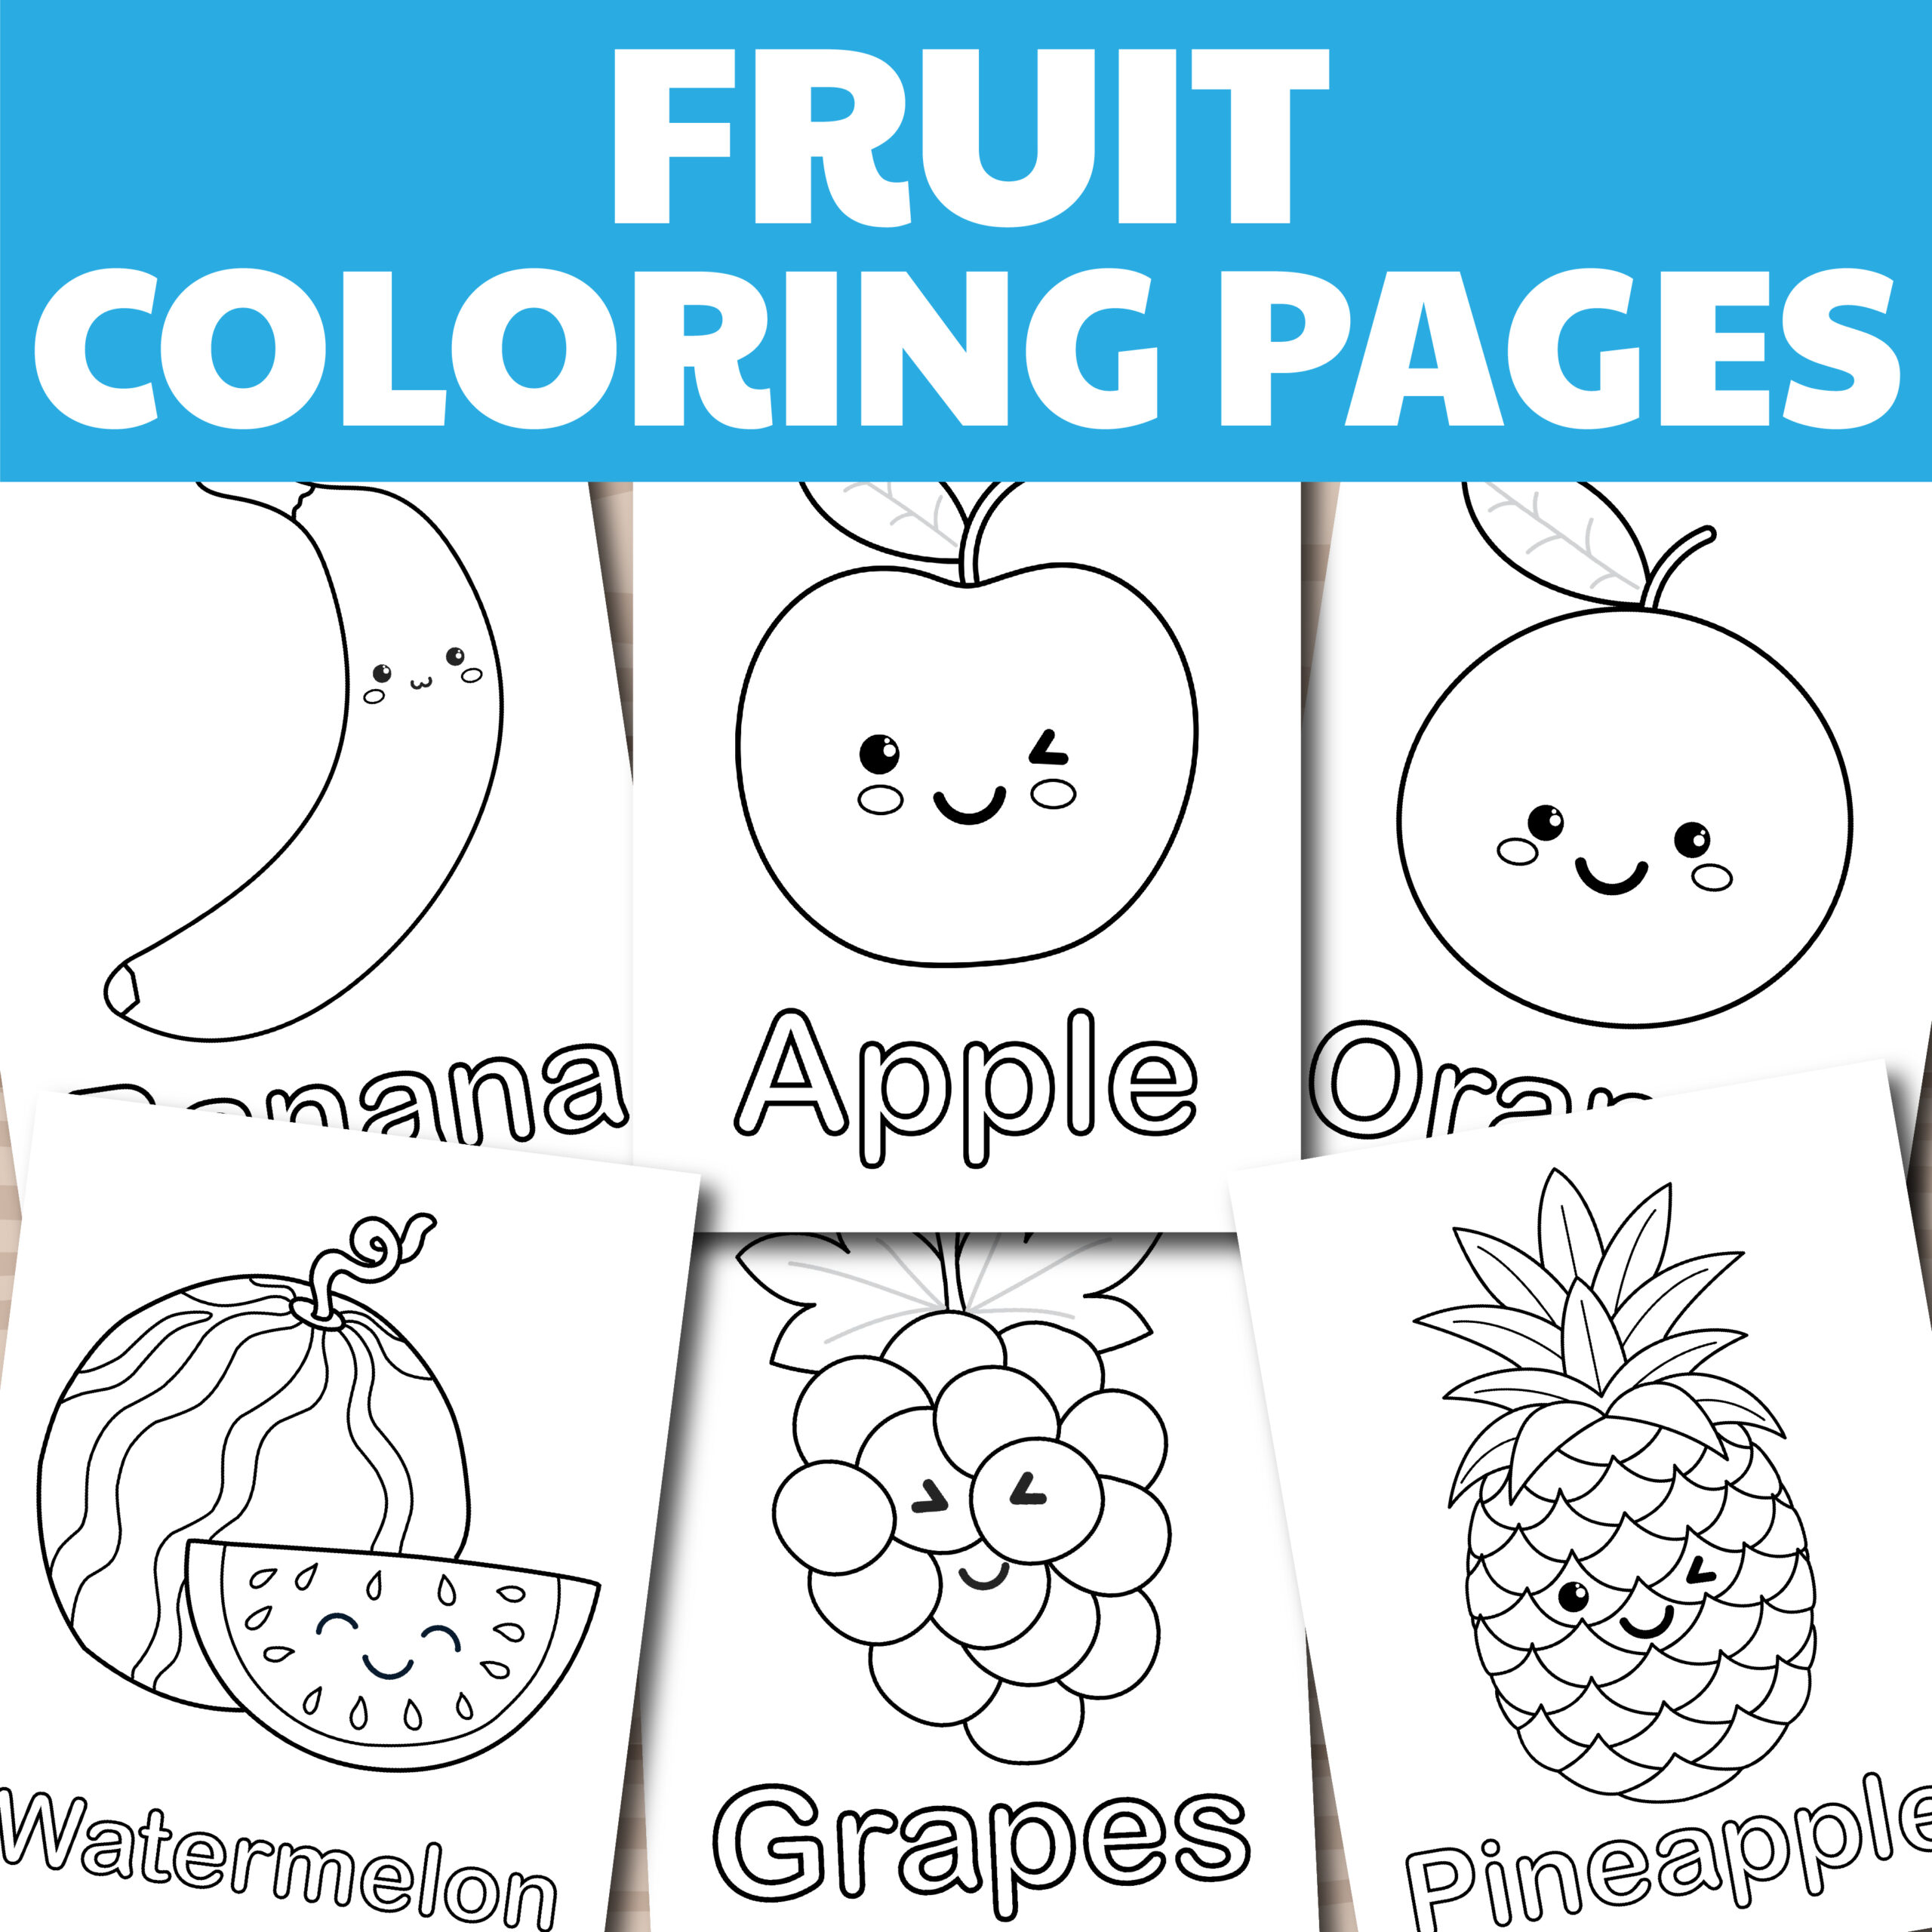 Fruit coloring sheets pages for kids